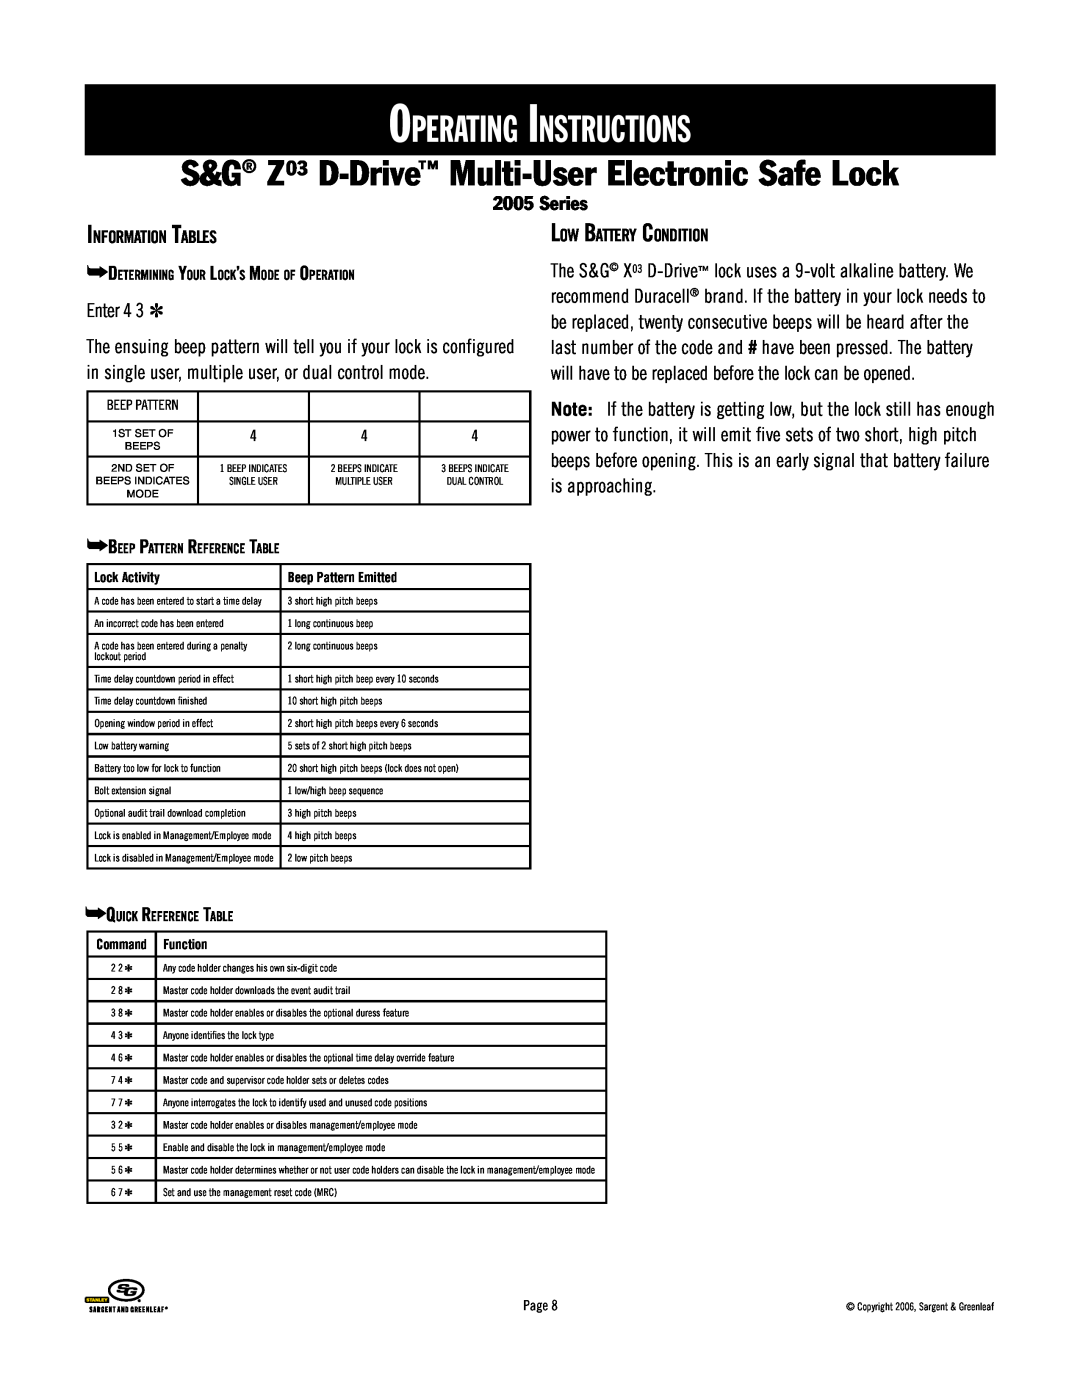 Stanley Black & Decker 2005 Series Enter, Operating Instructions, S&G Z03 D-Drive Multi-UserElectronic Safe Lock, Function 